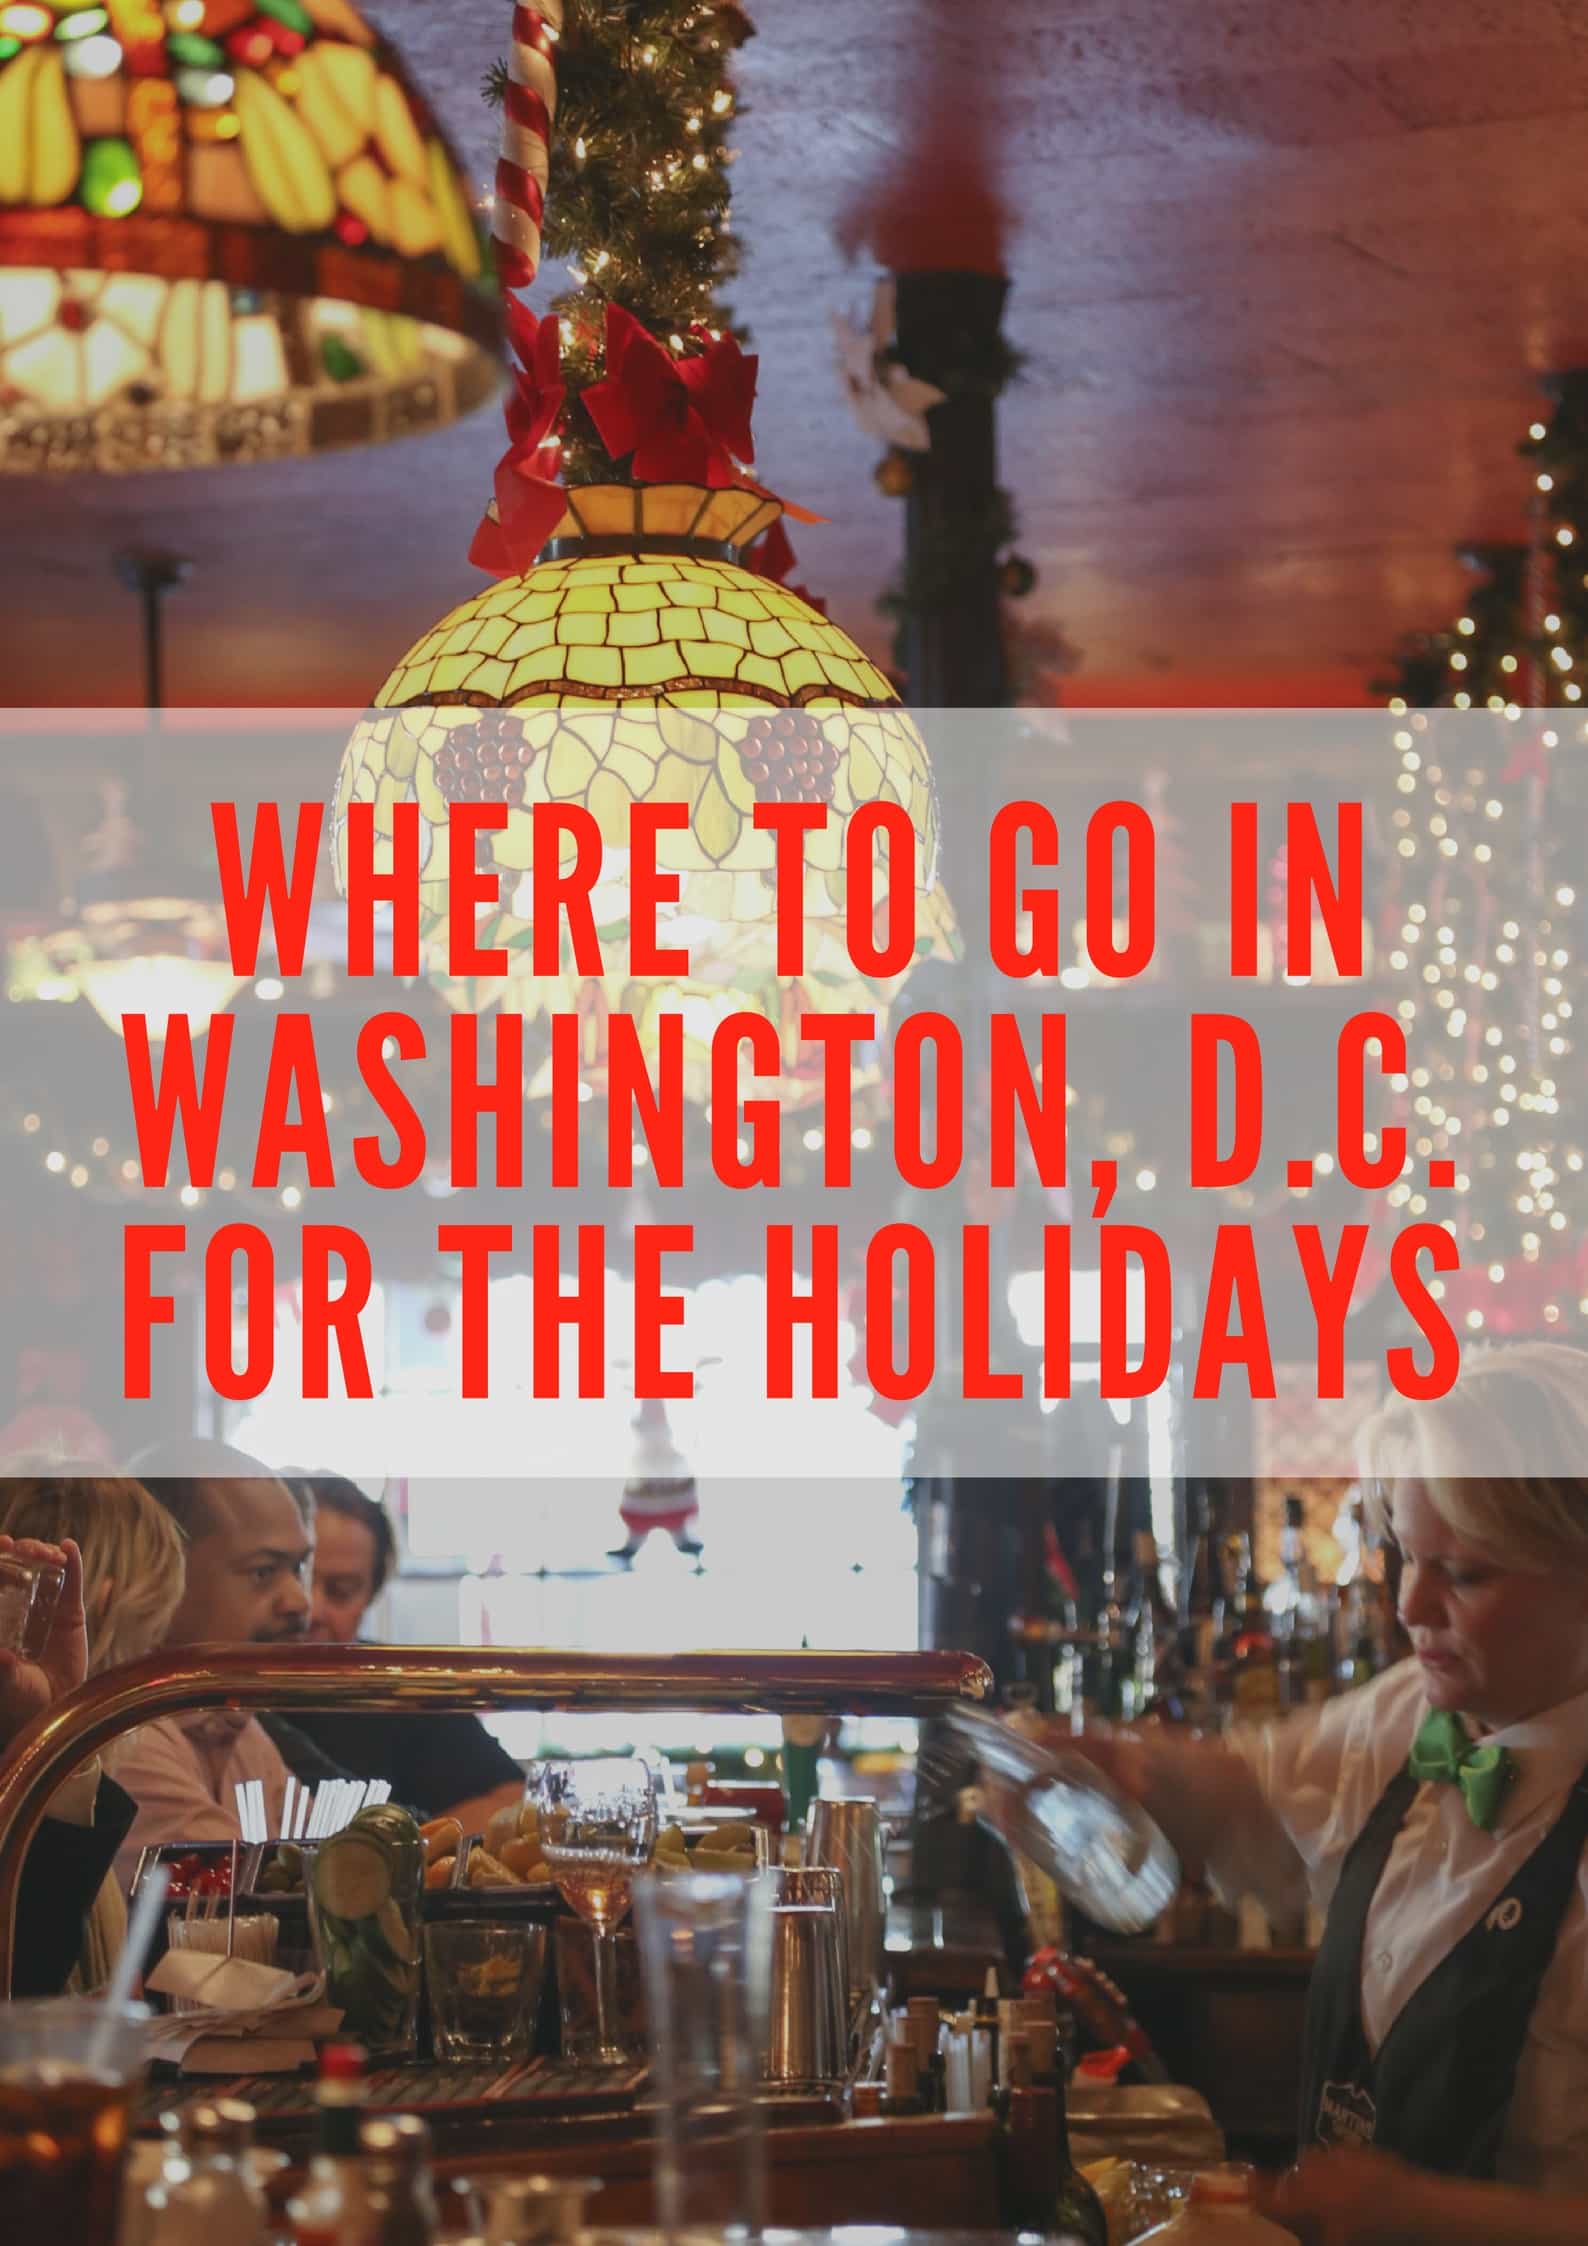 Doing the Holidays in Washington, D.C.